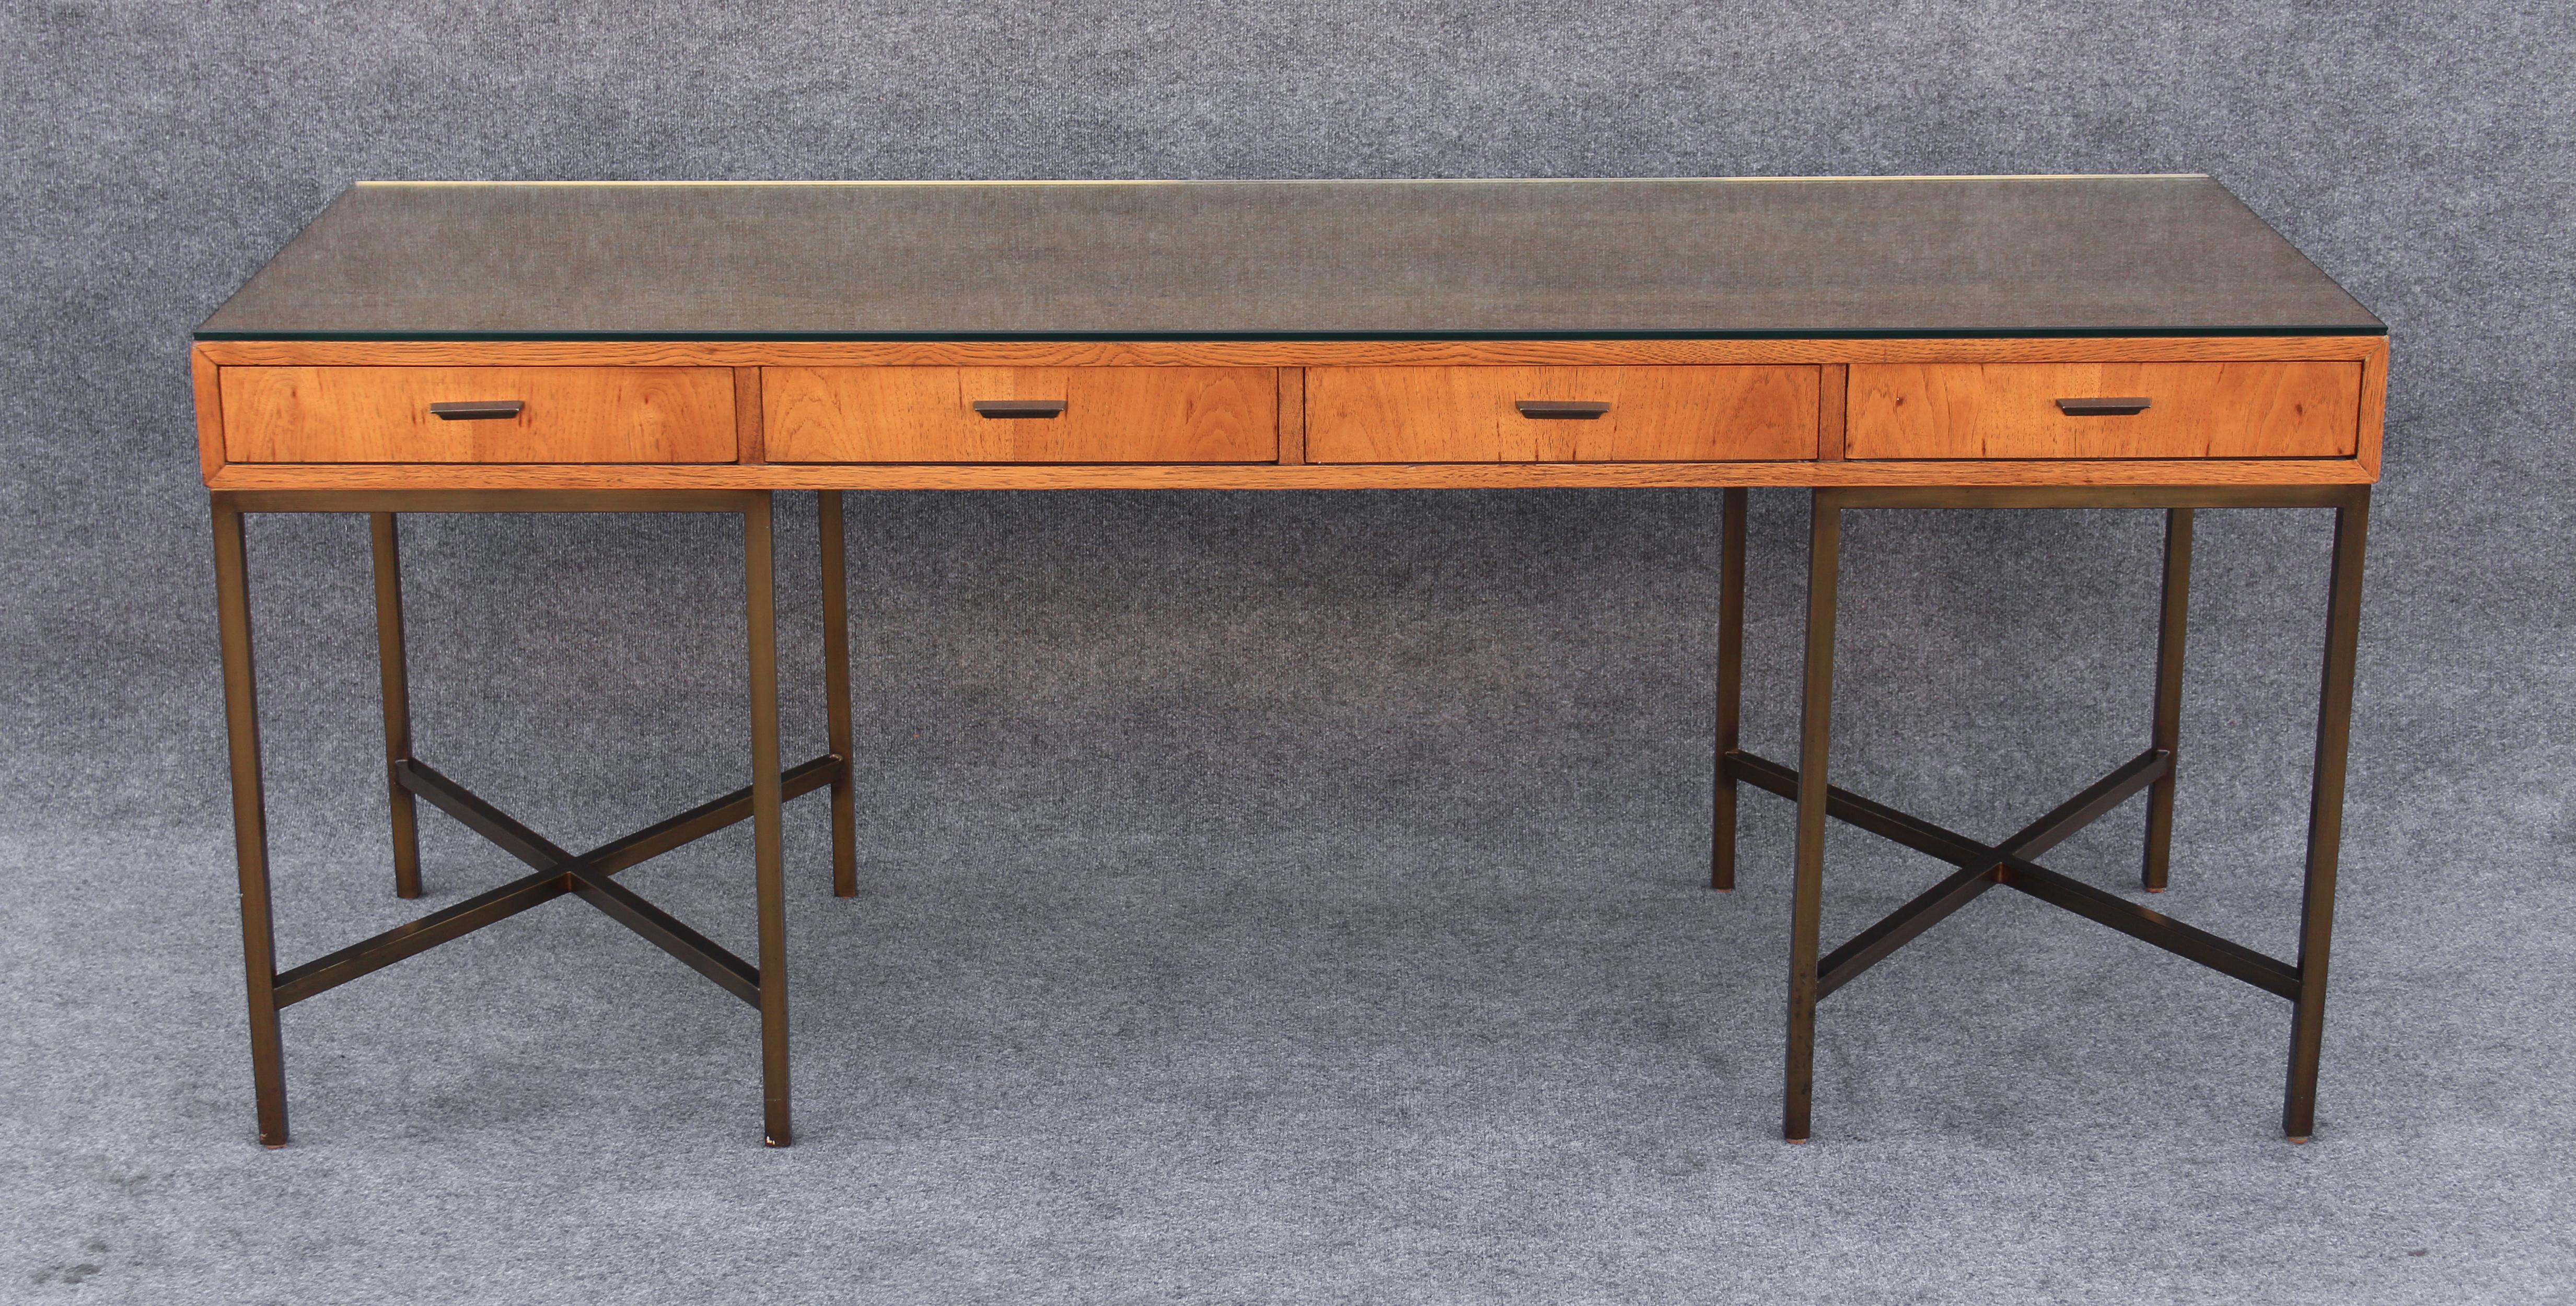 Made in the United States towards the late 1960s, this desk was designed by Jack Cartwright and manufactured by Founders in very low numbers, probably due to the quality required during its production. The wood was carefully chosen for its excellent